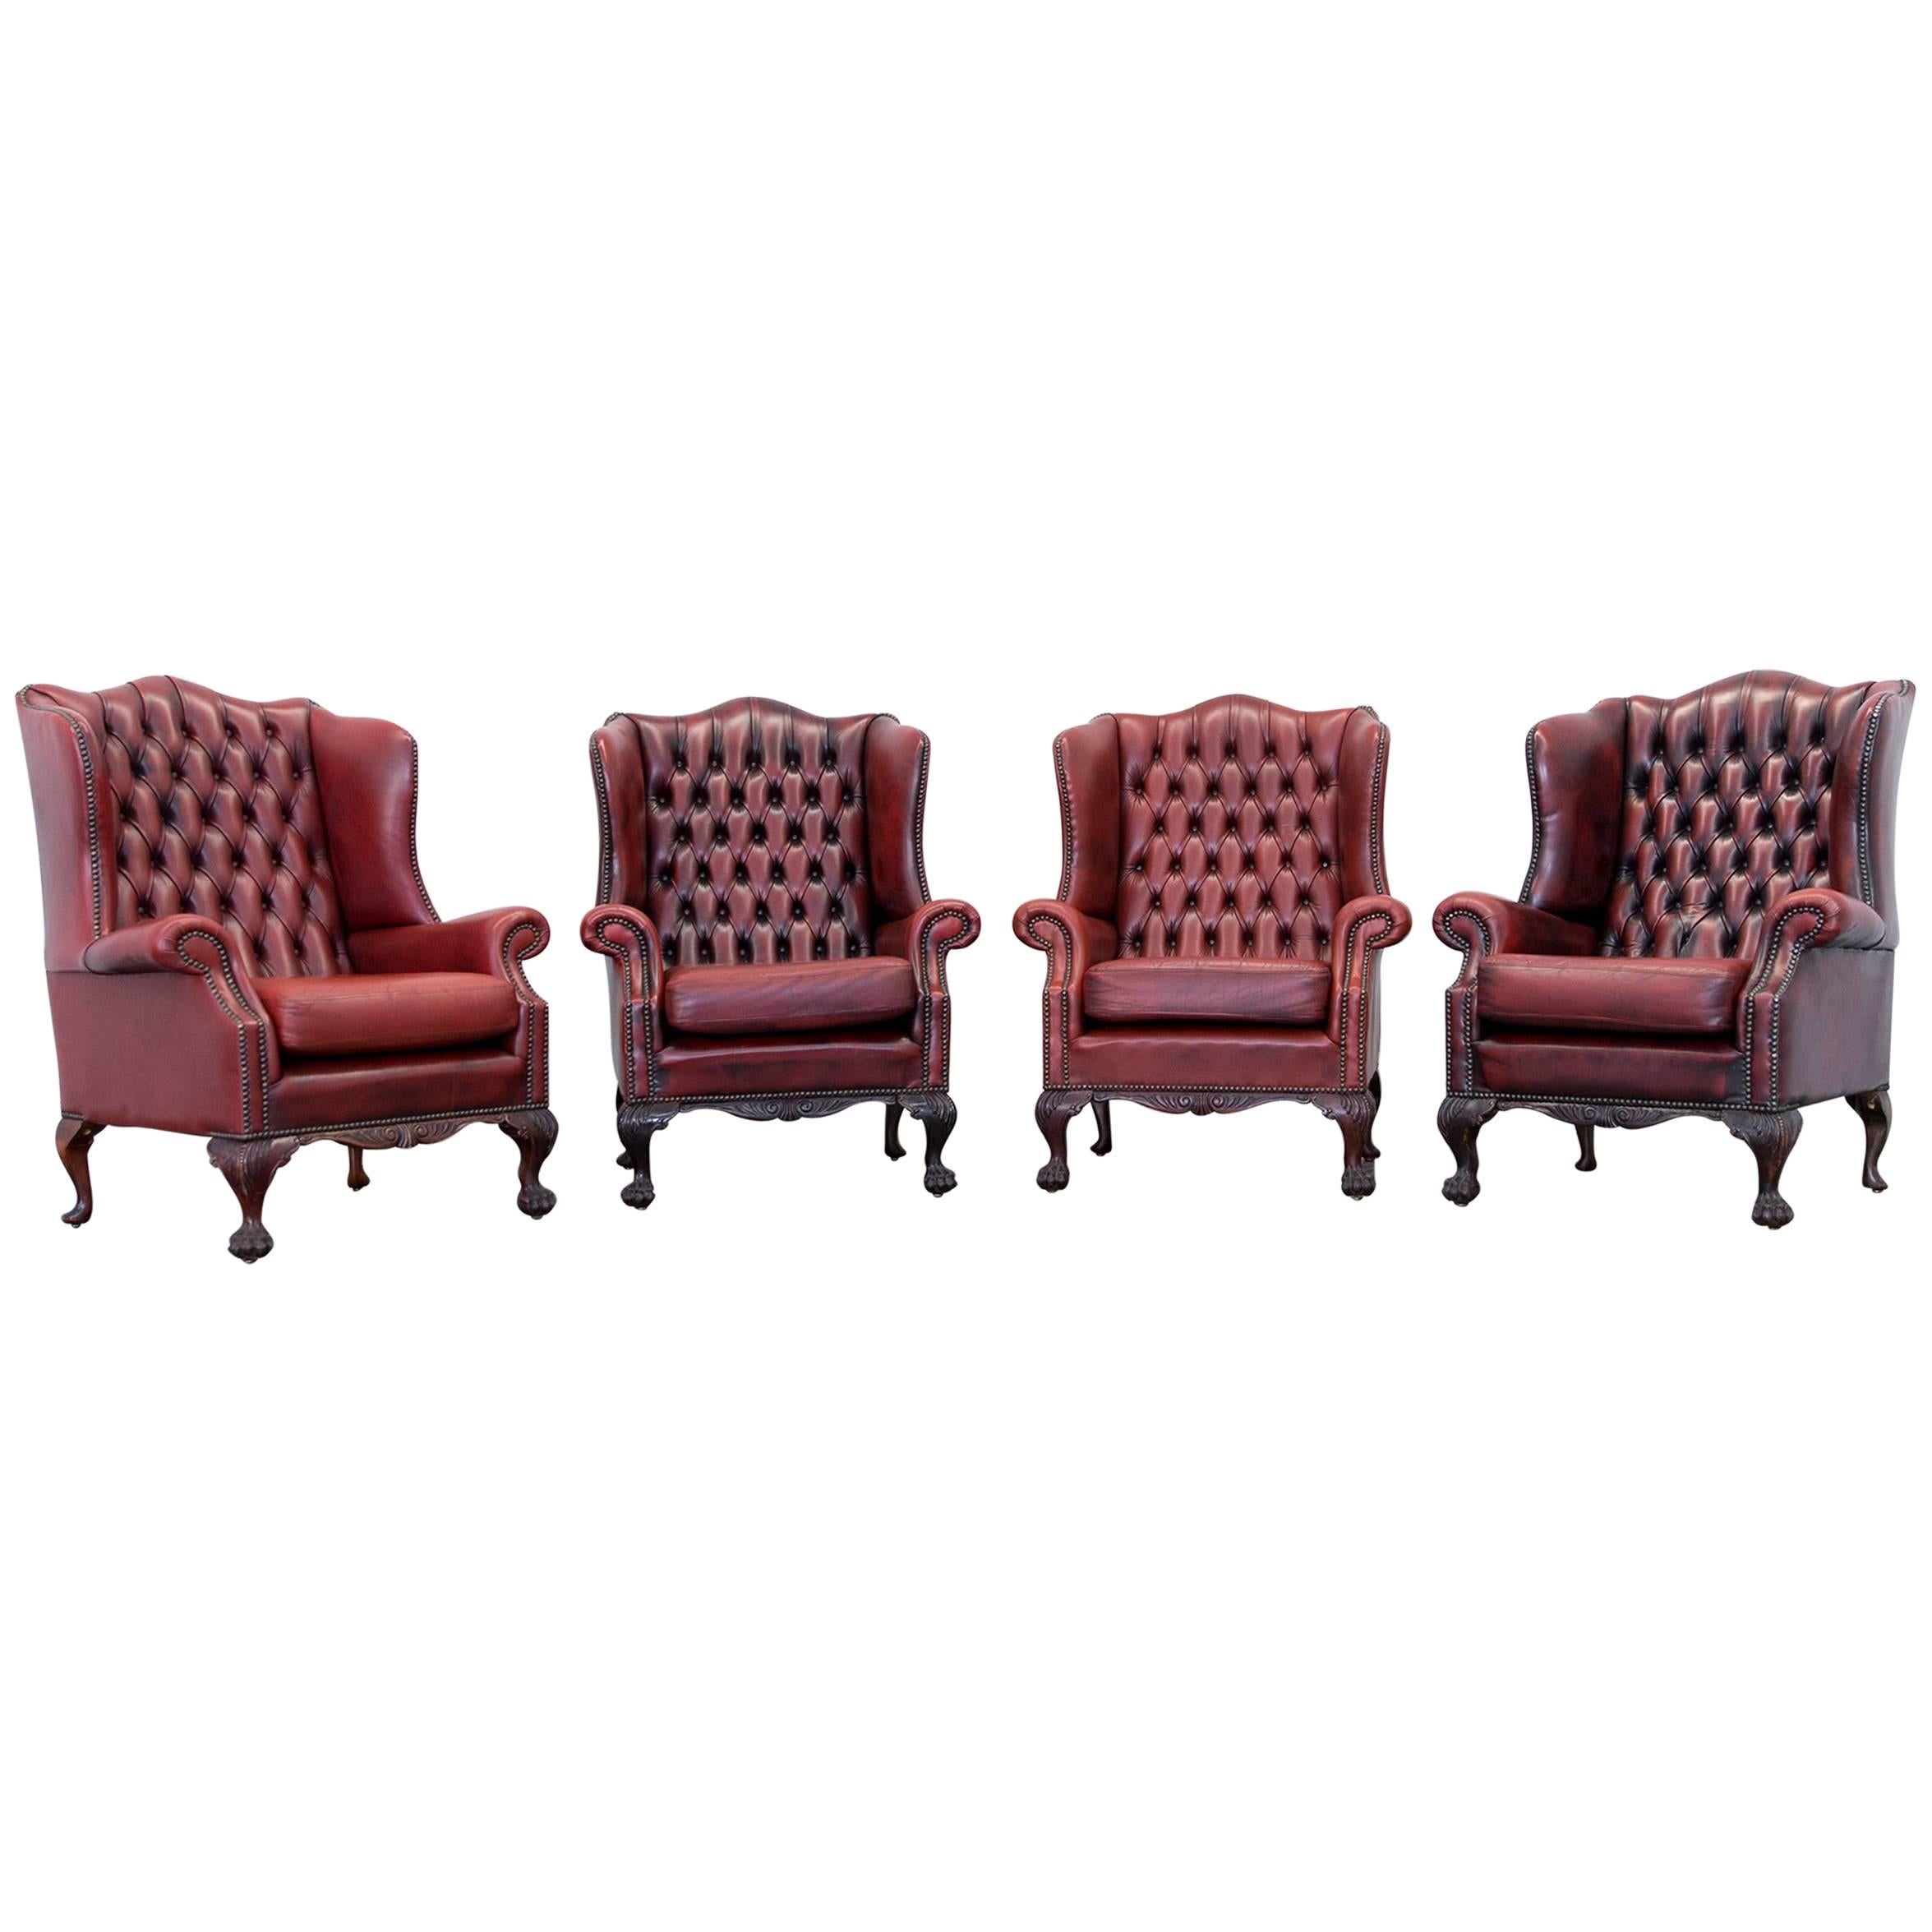 Chesterfield Wingback Chair Set of Four in Stunning Oxblood Red Full Leather